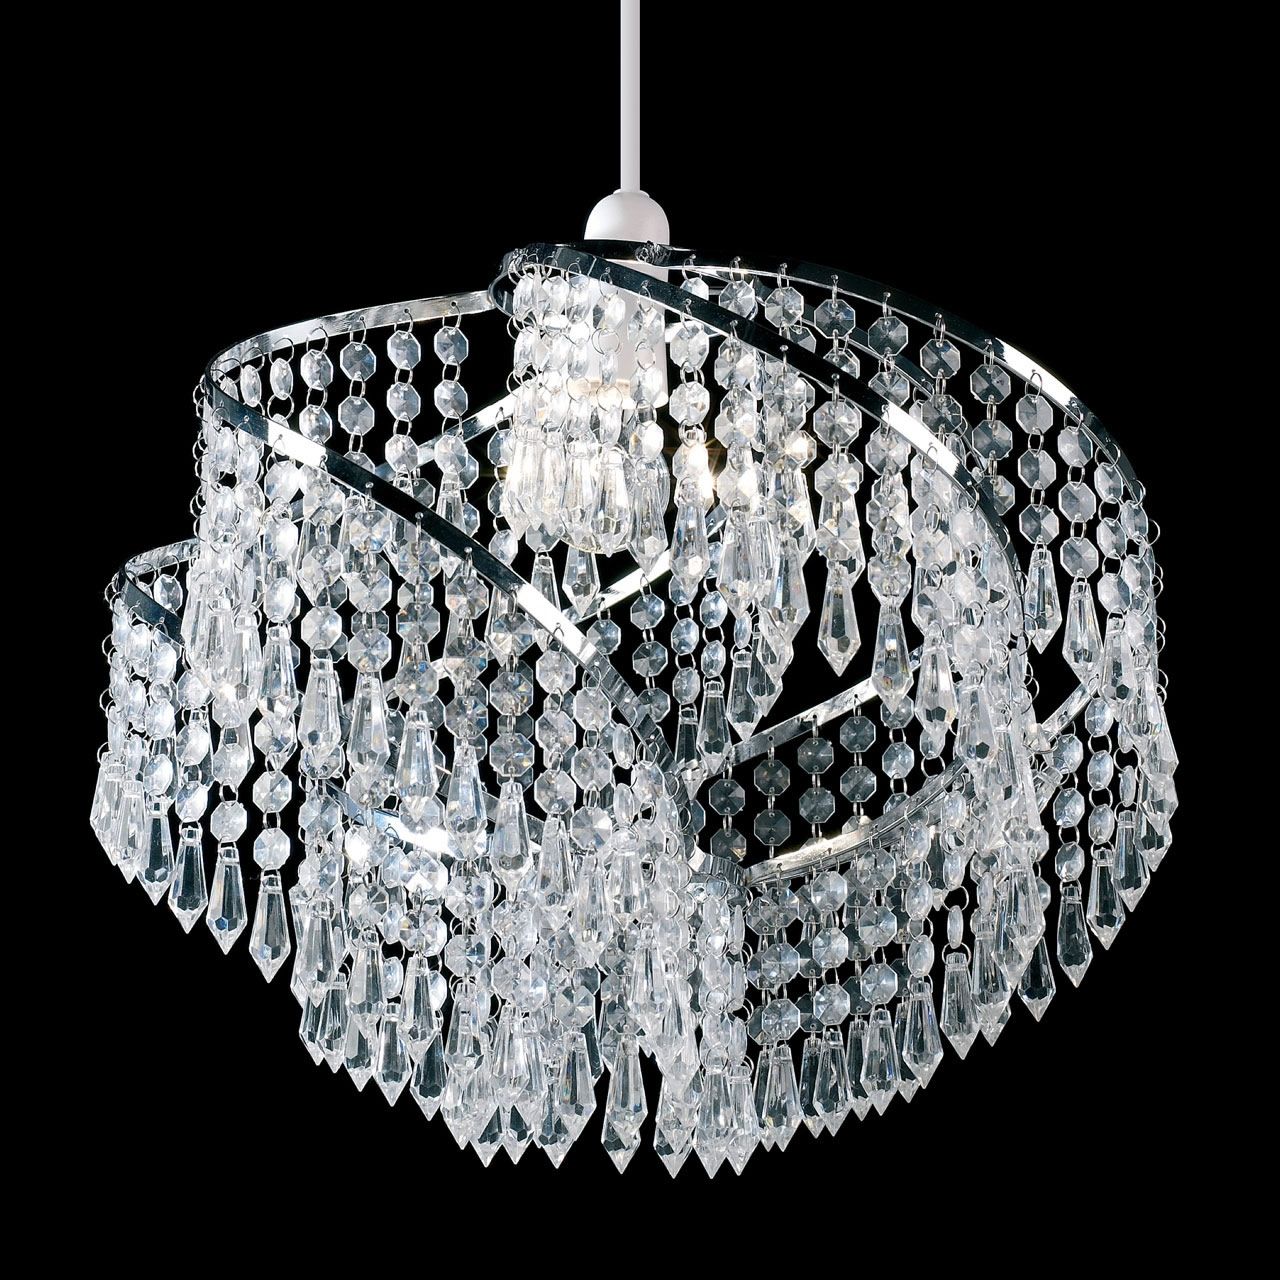 Lighting Wonderful Candle Chandelier Non Electric For Modern Intended For Acrylic Chandelier Lighting (View 16 of 25)